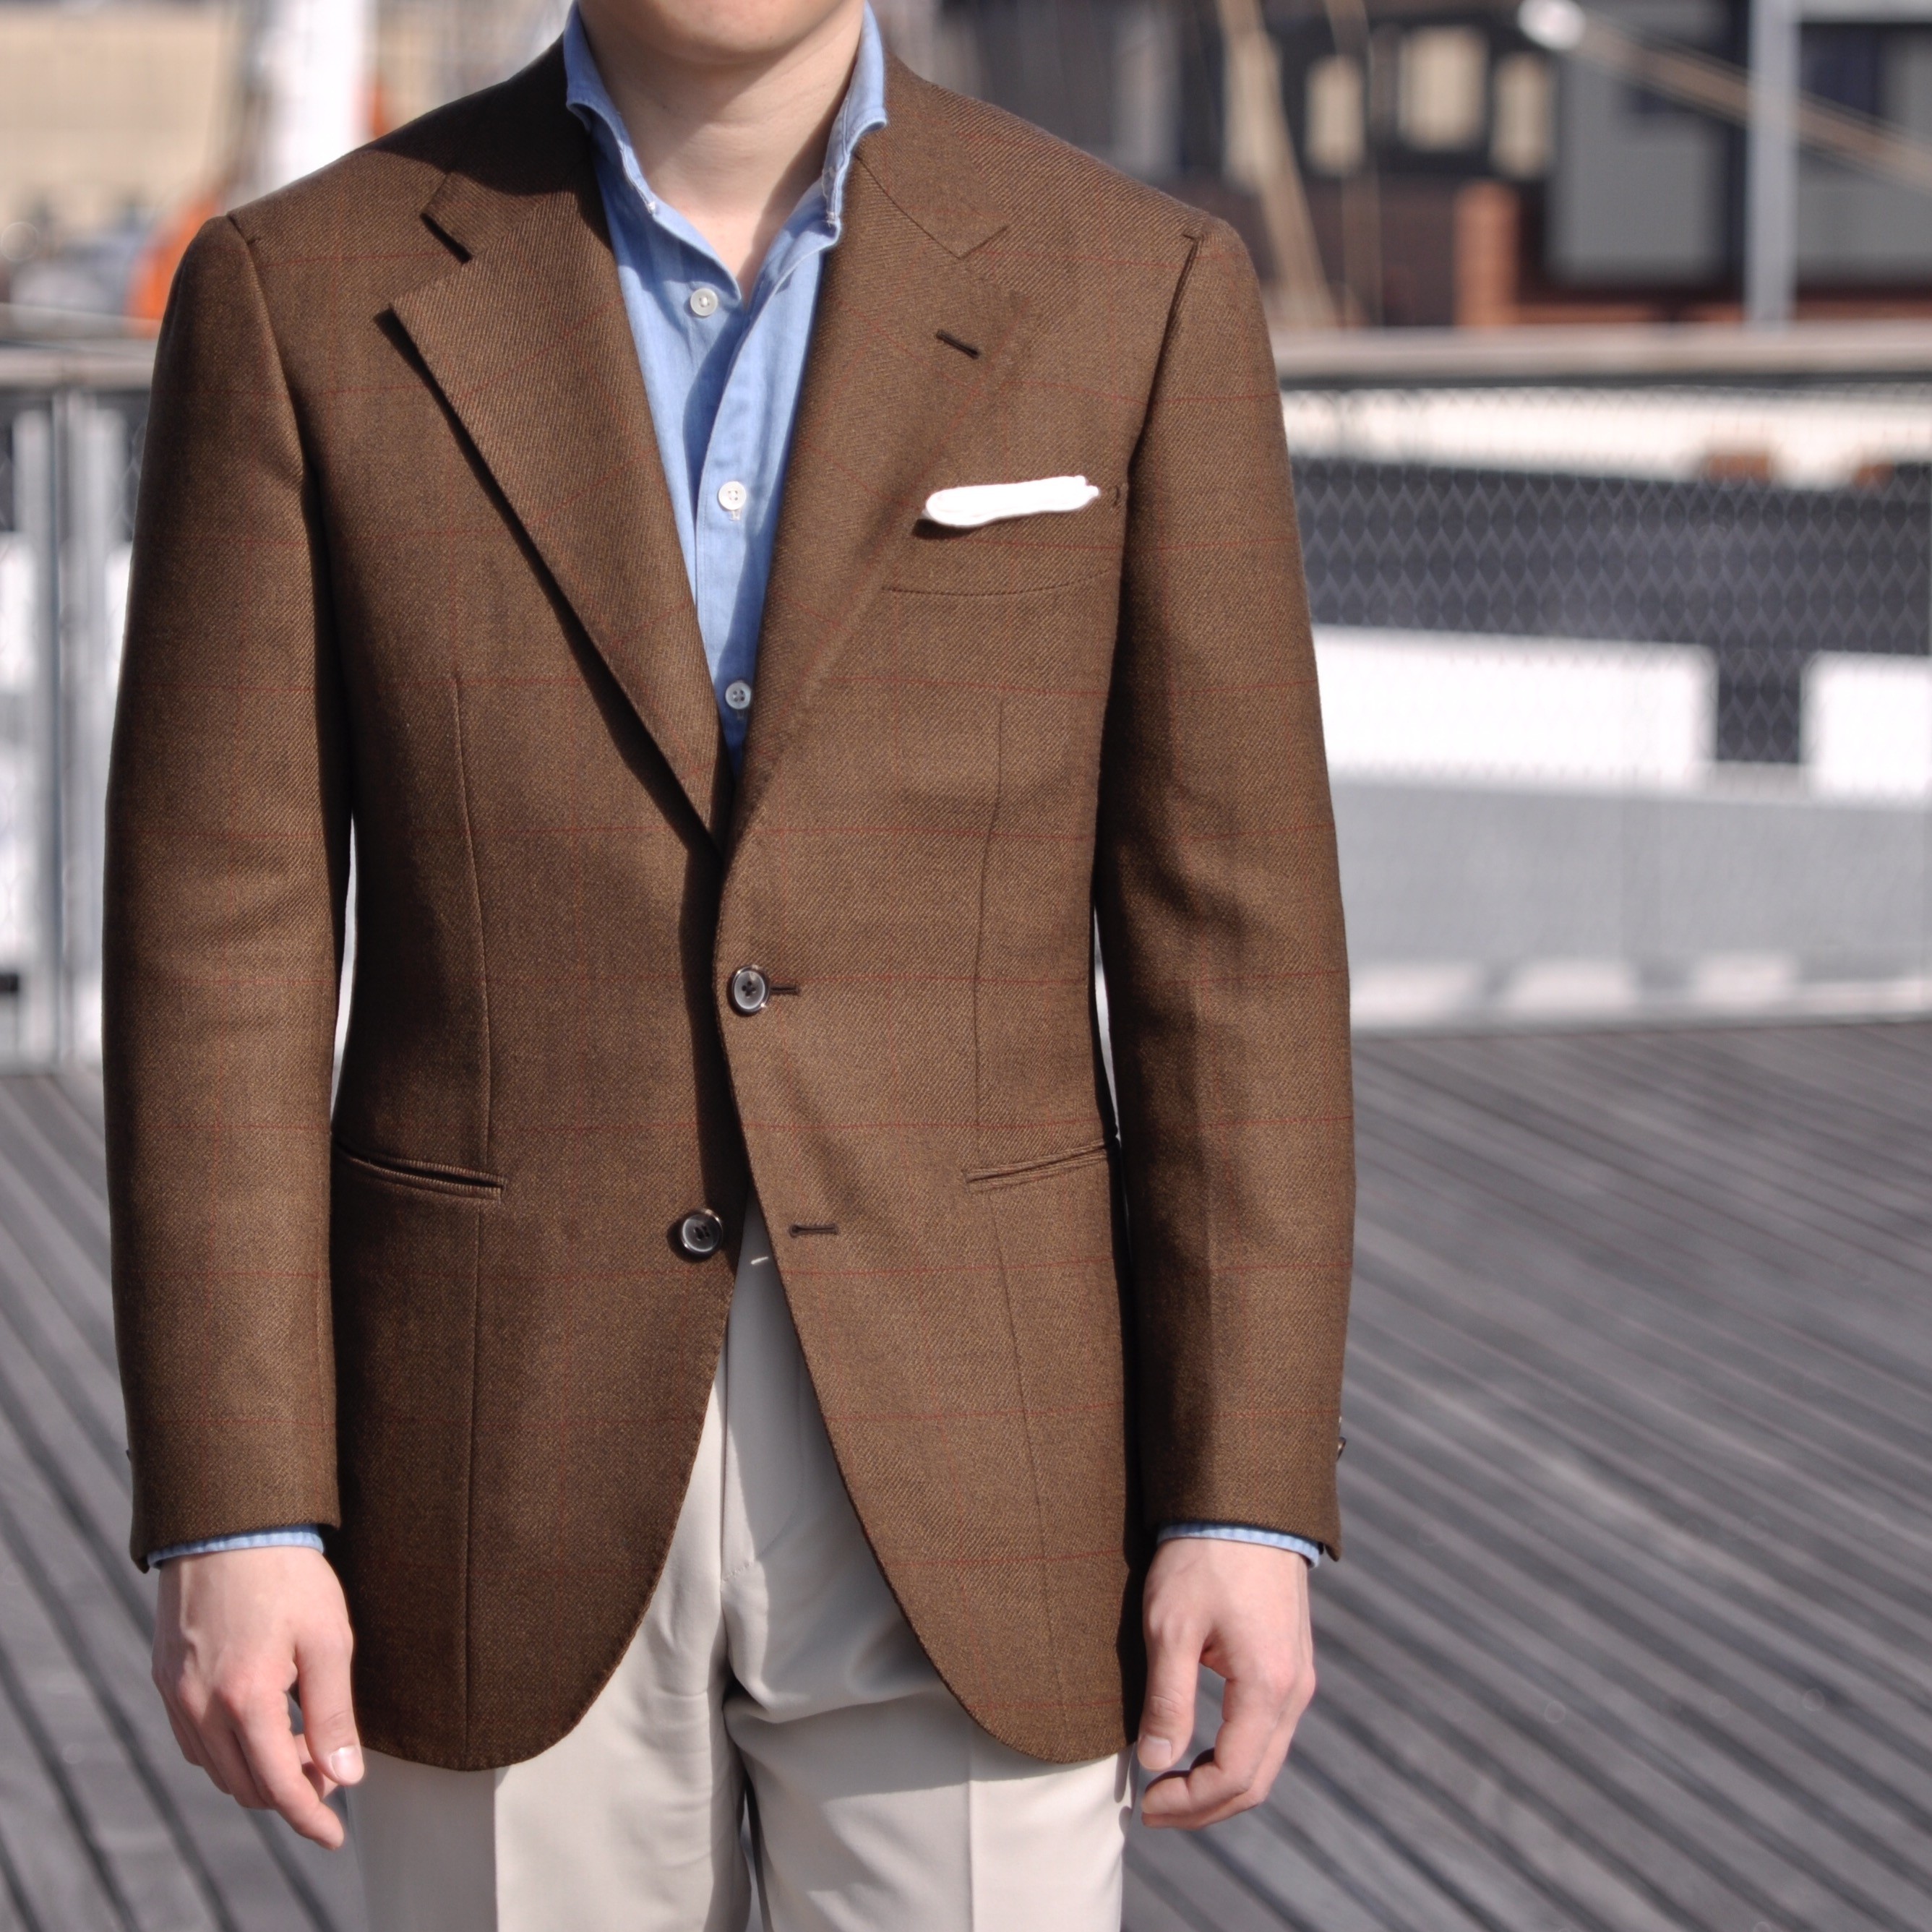 Agreeable Menswear Post Of The Day | Page 117 | DressedWell